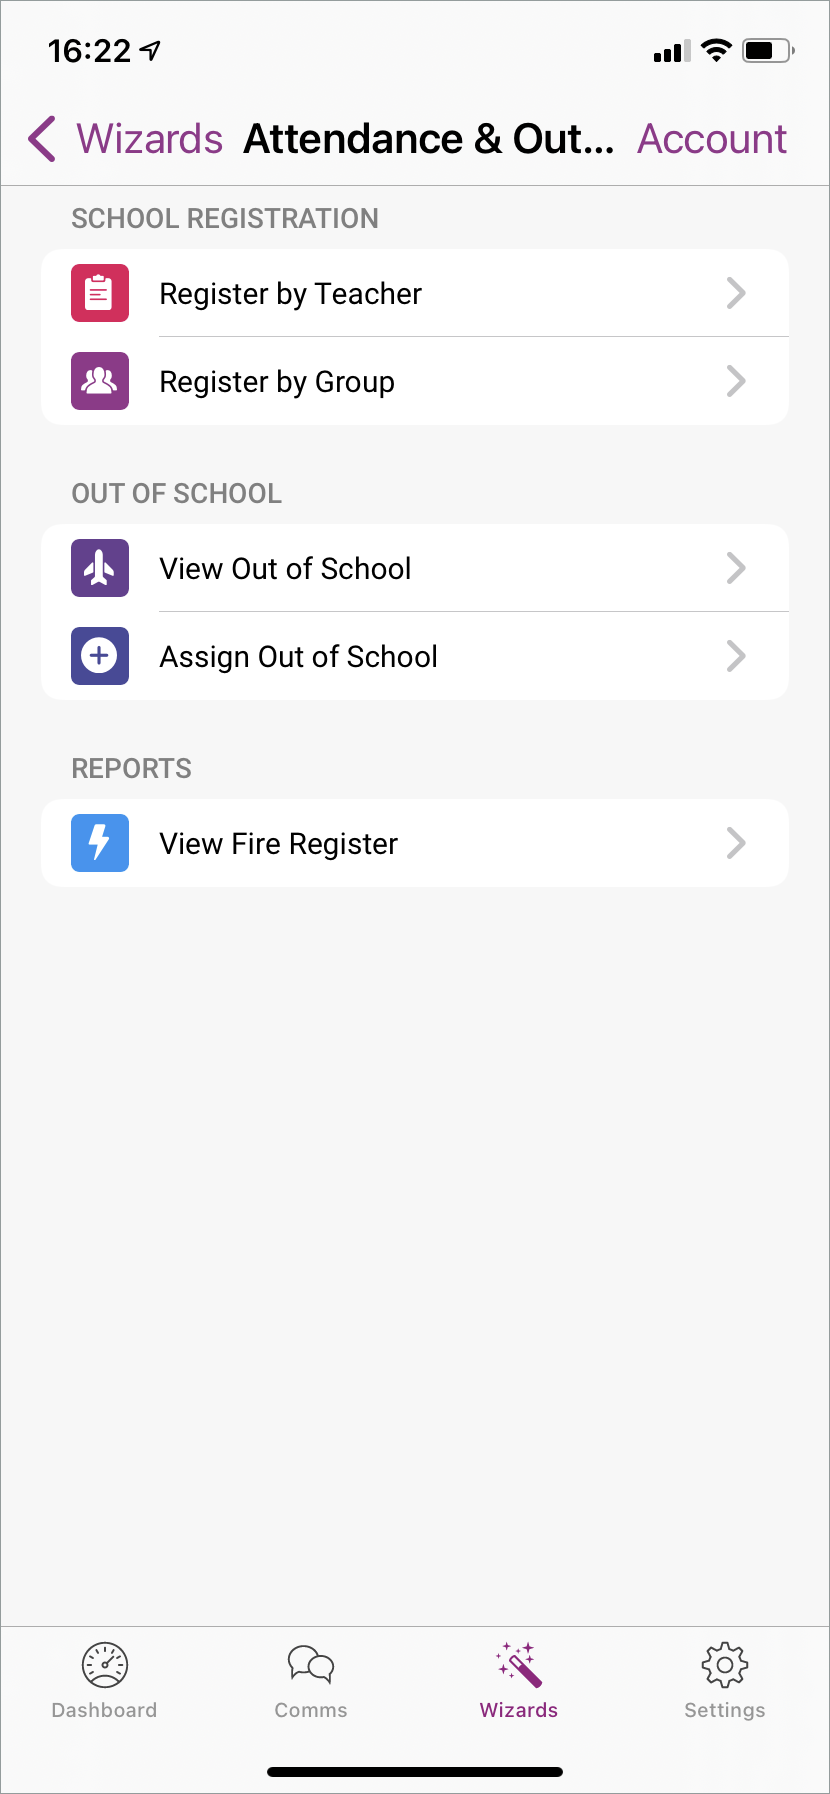 iTeacher app attendance and out of school